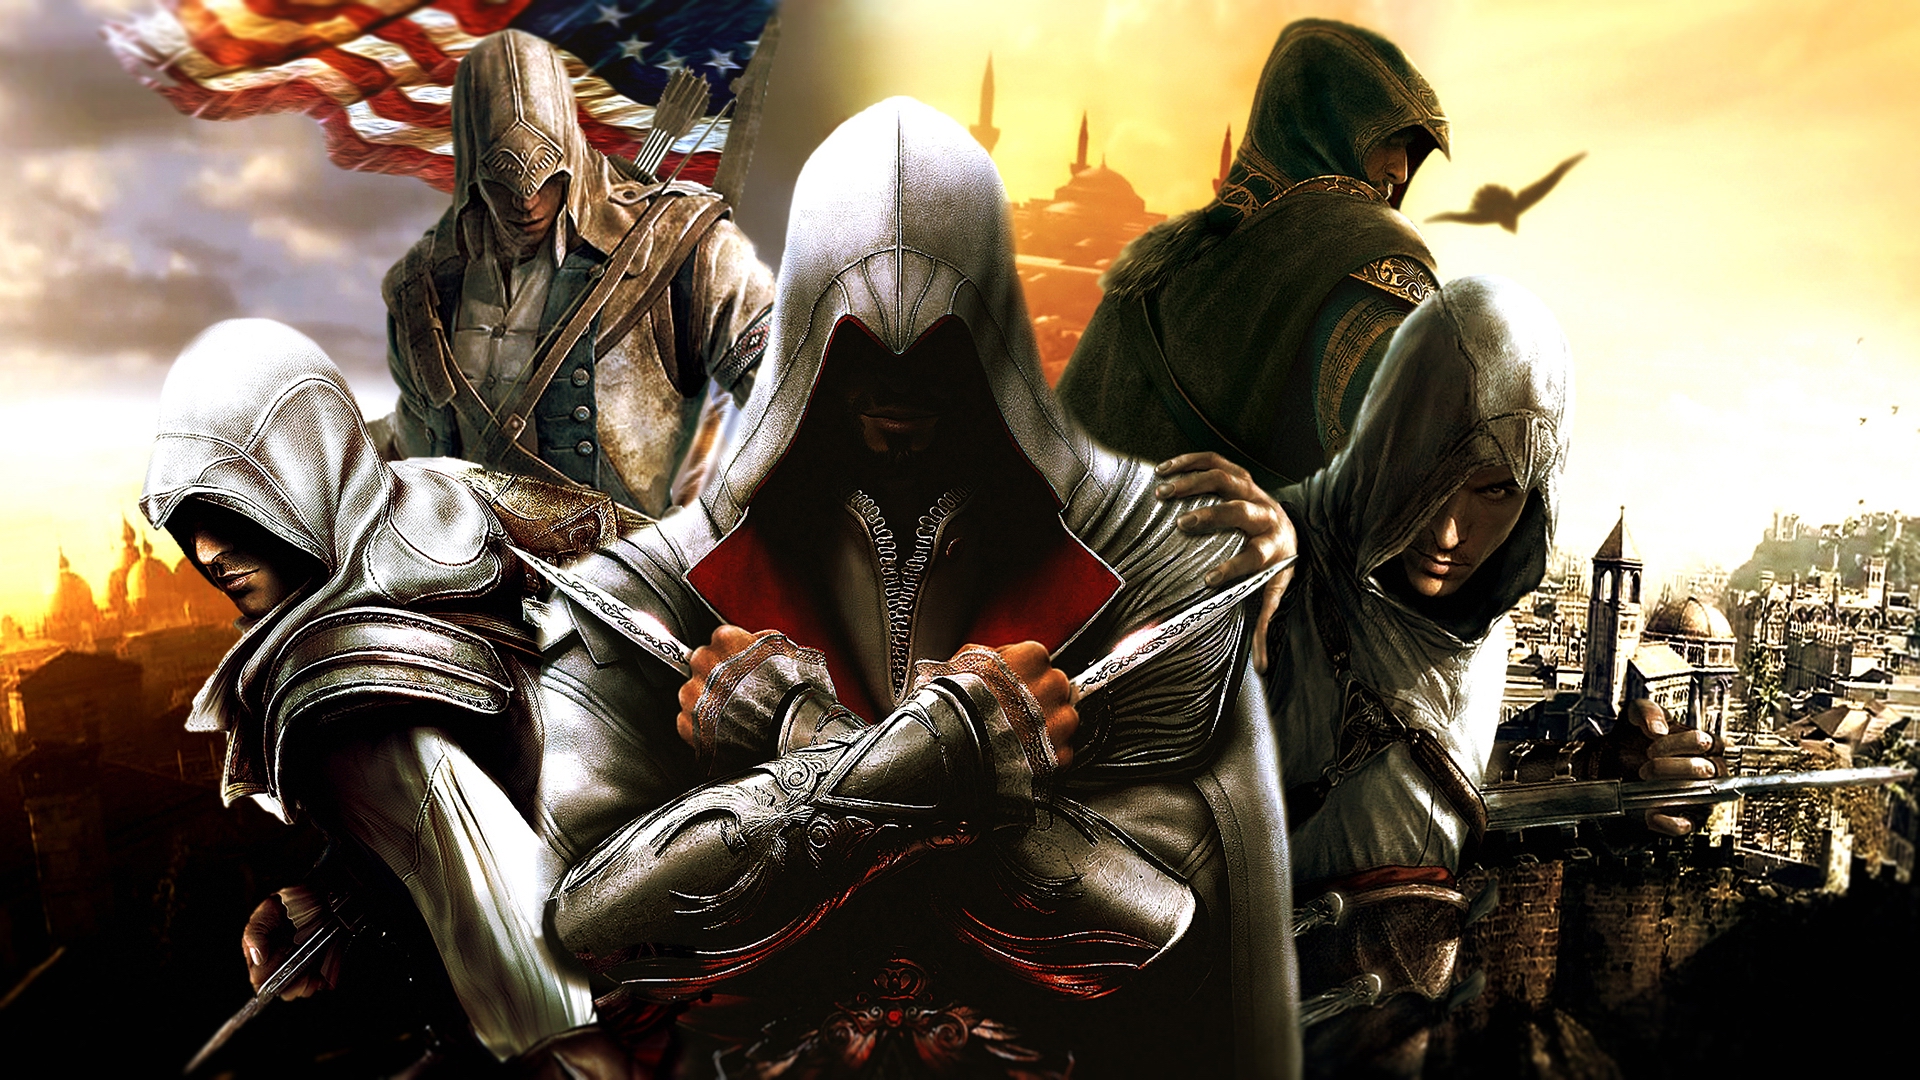 download the new version for iphoneAssassin’s Creed